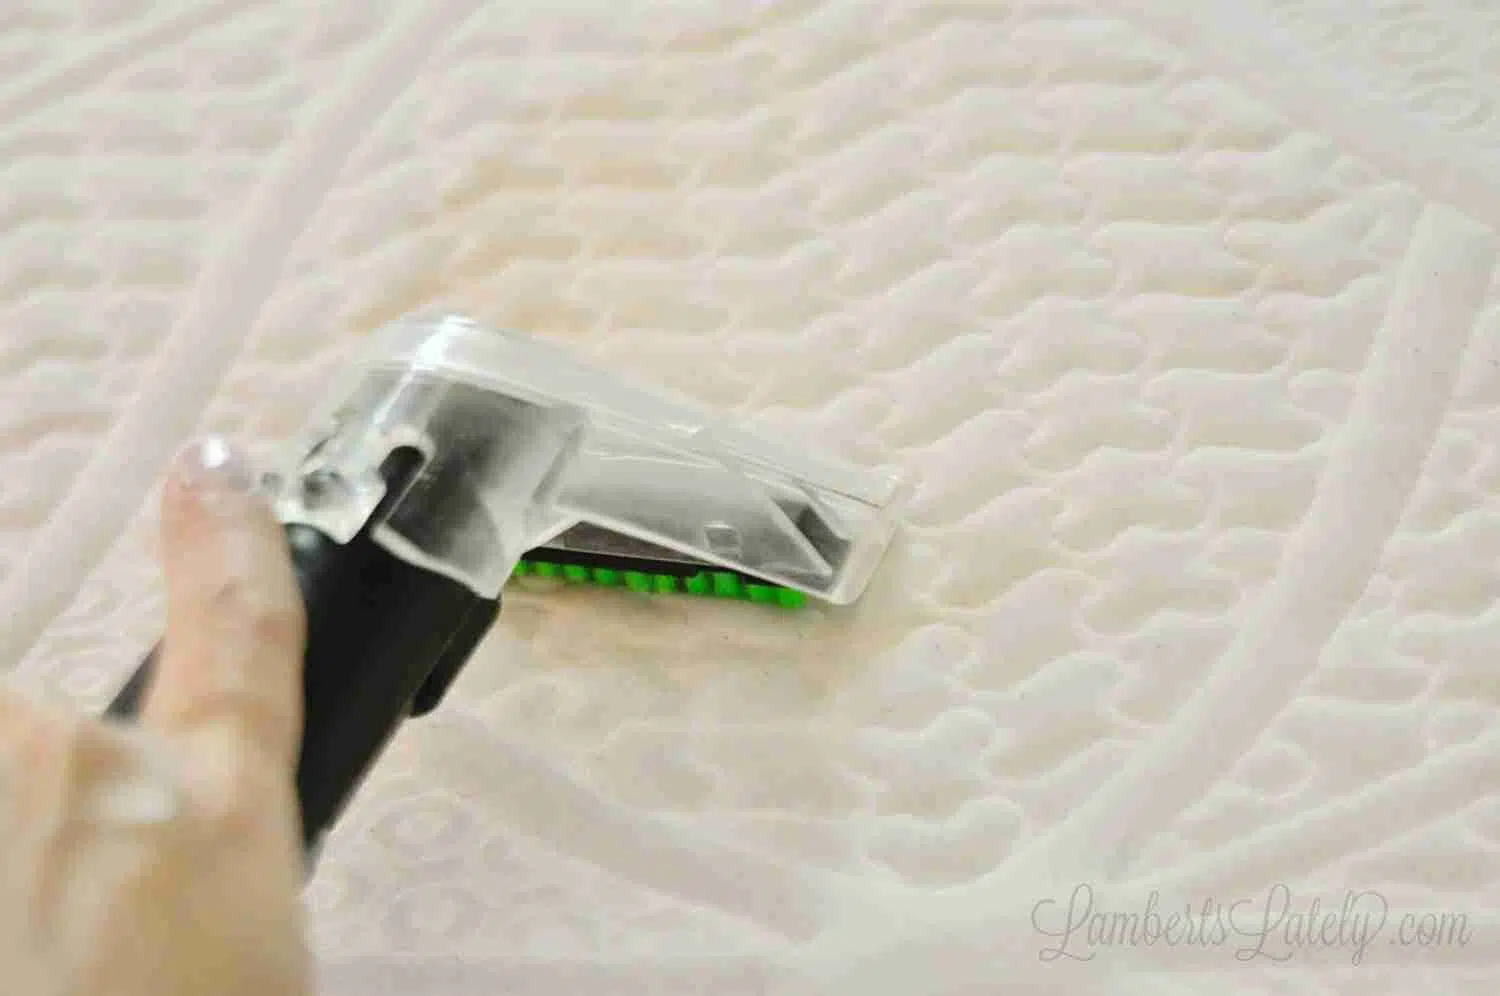 carpet cleaner being used on a dirty mattress